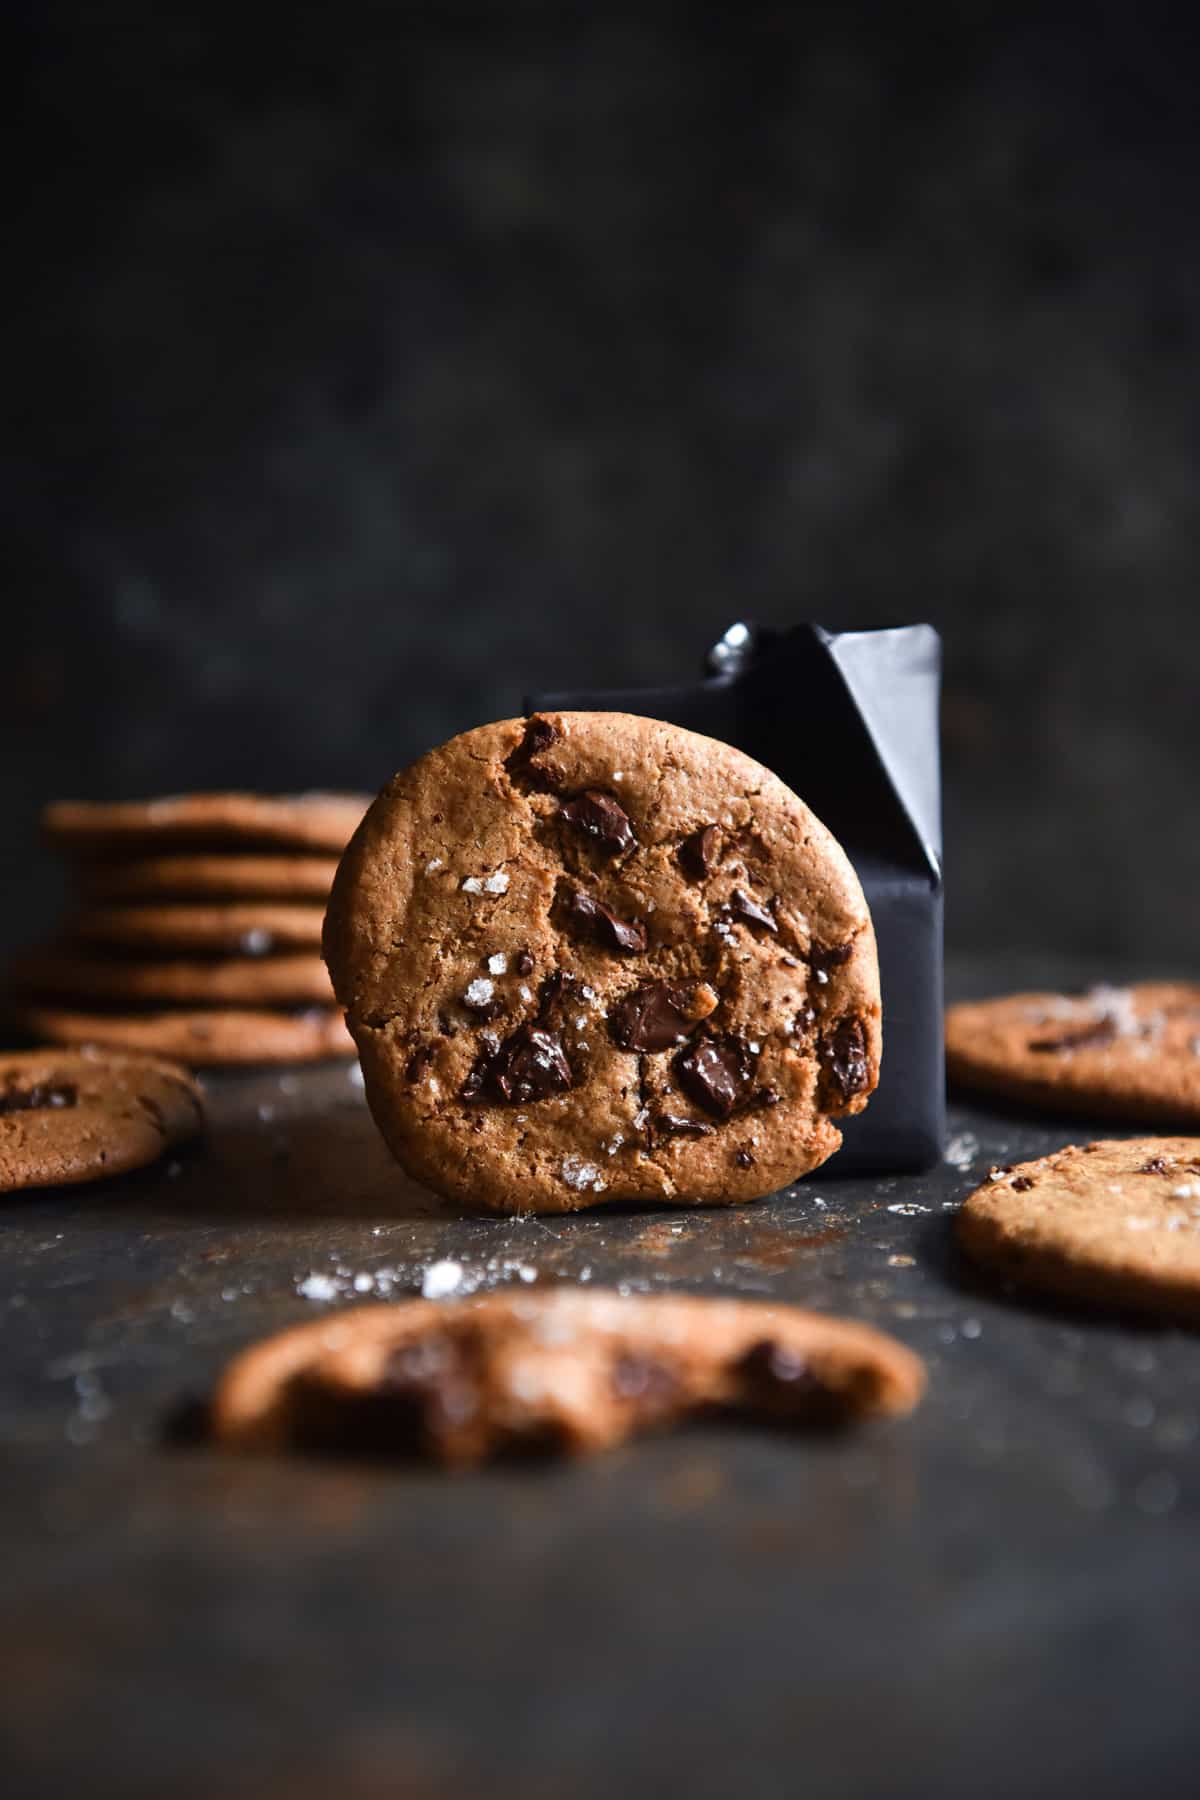 A moody side on image of an almond butter cookie against a dark coloured background. The central cookie faces the camera and is studded with chocolate chips. The remaining cookies lean up against the shelf around the central cookie.